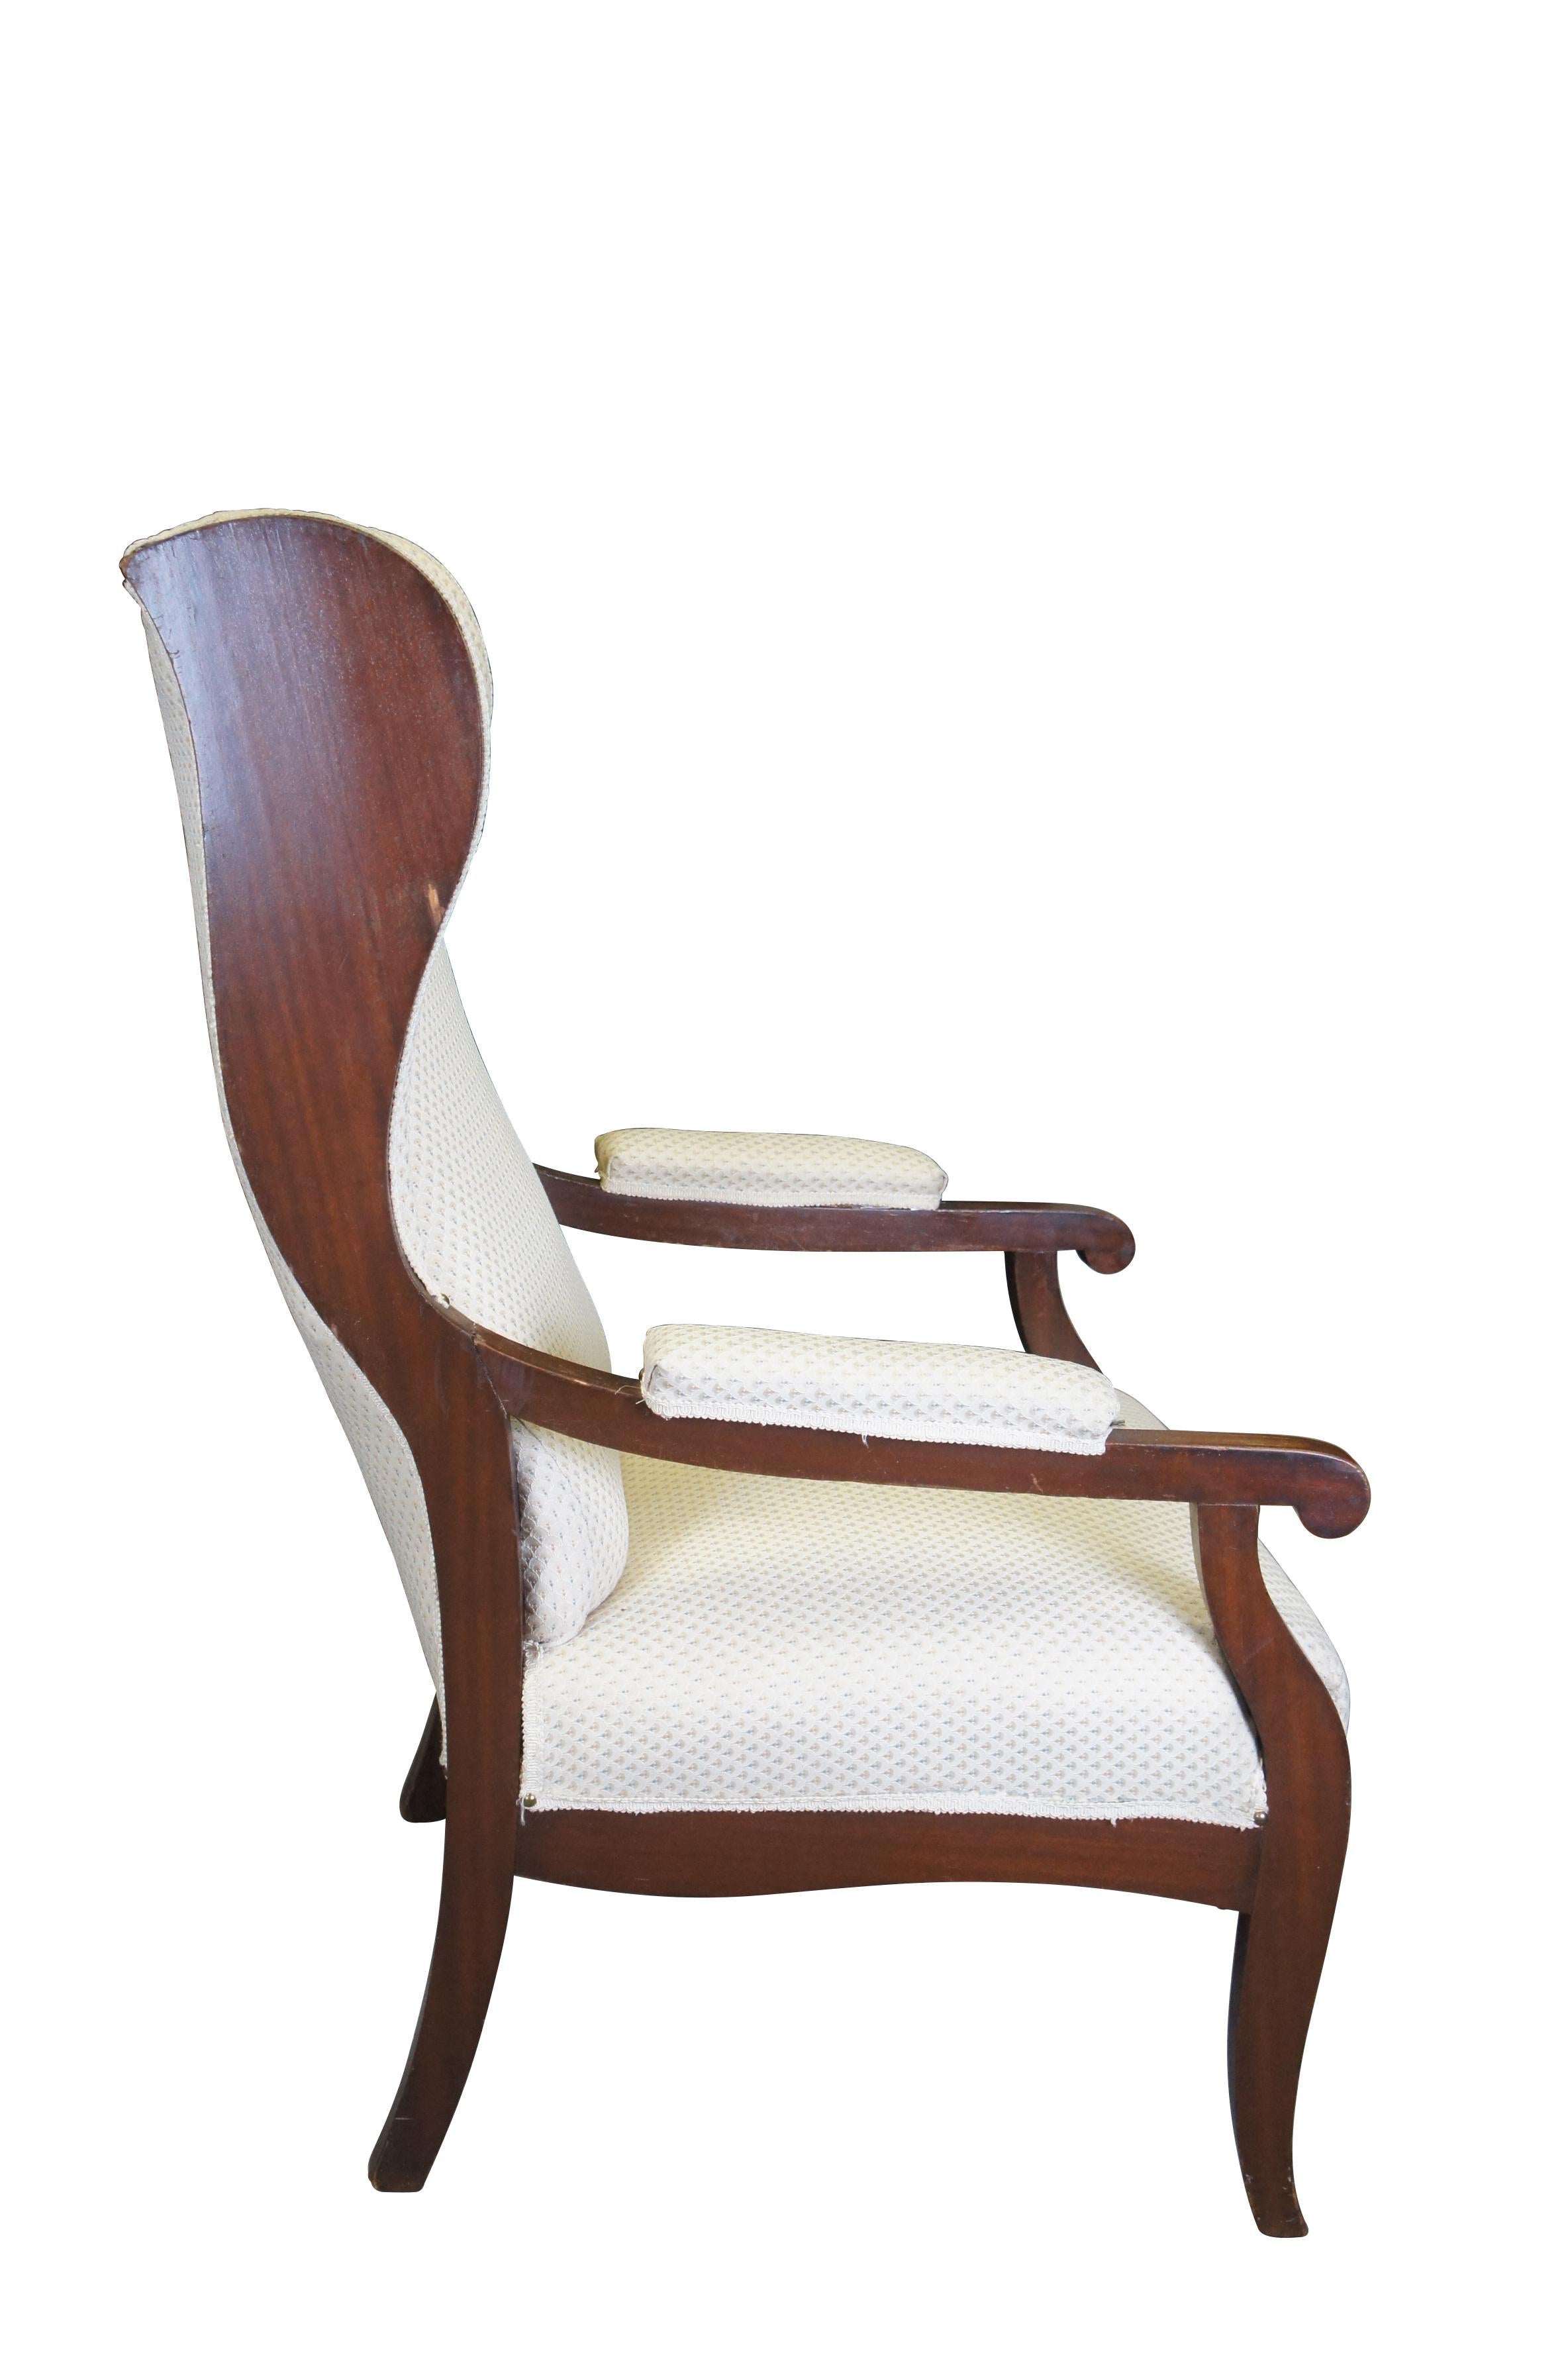 Antique German Biedermeier Mahogany Fauteuil Wingback Library Arm Chair In Good Condition For Sale In Dayton, OH